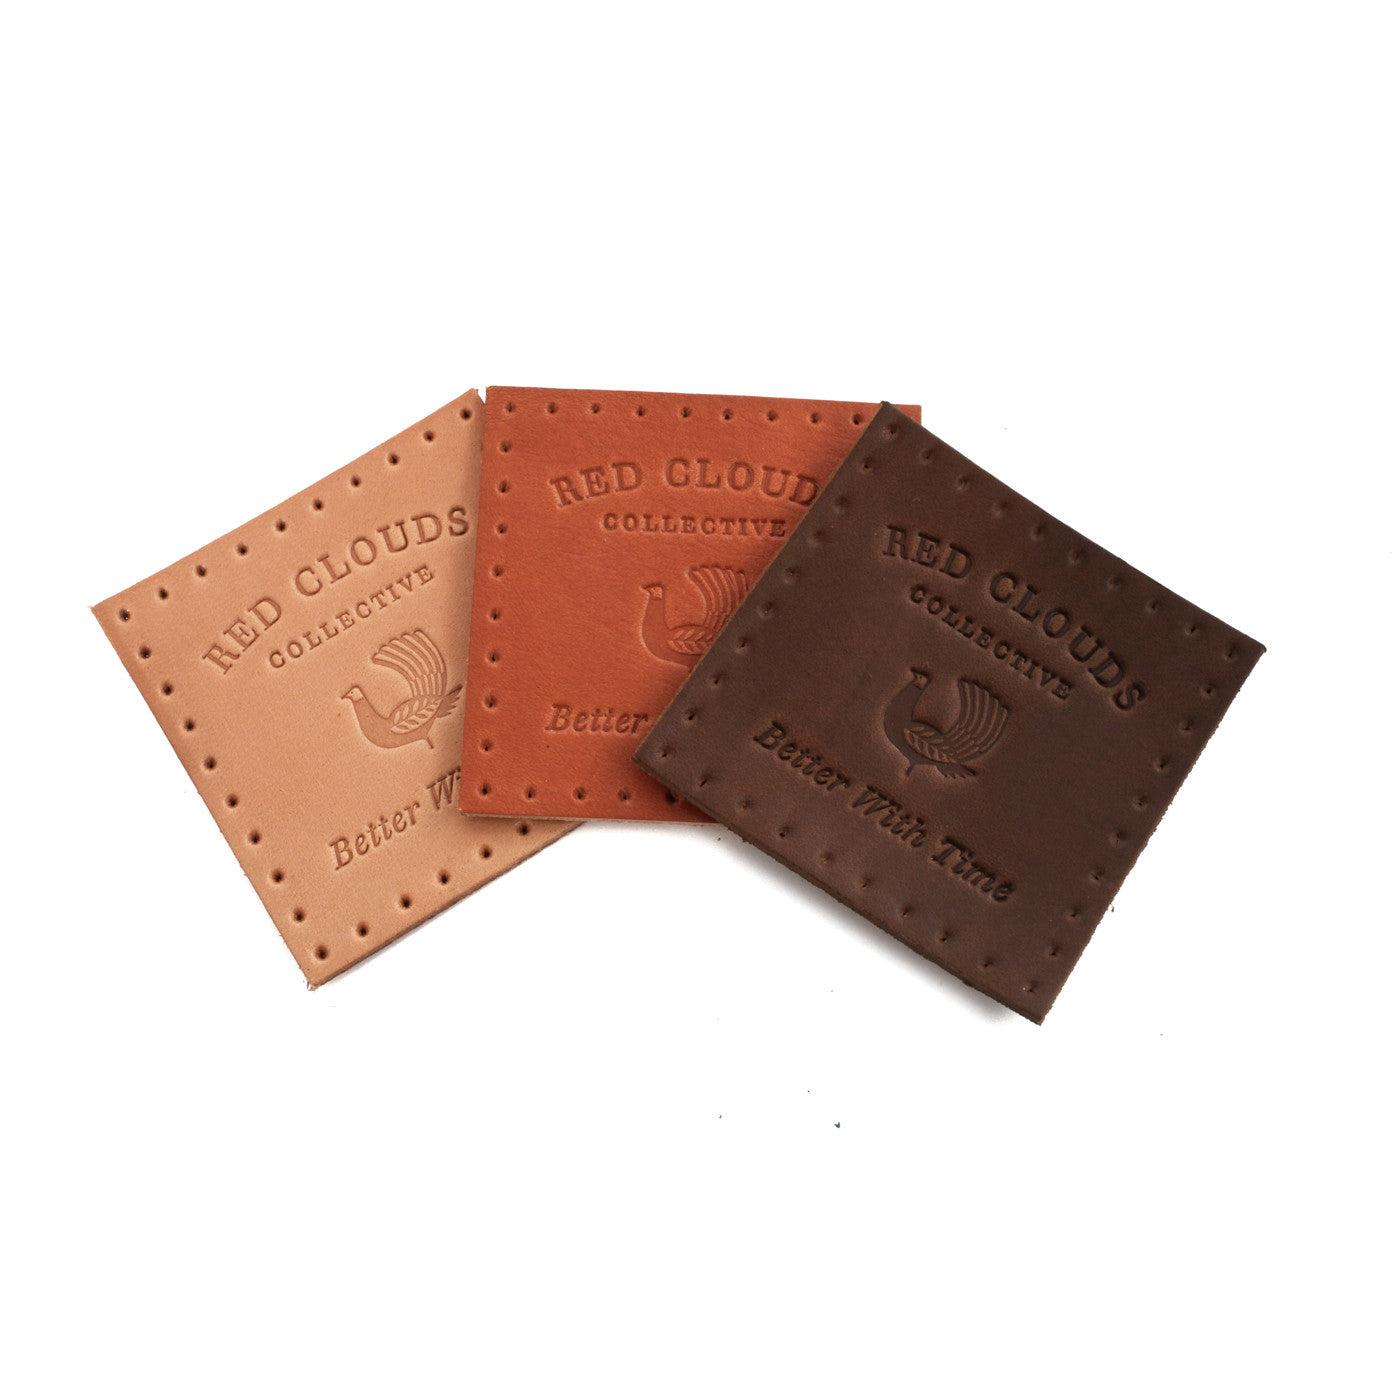 Leather patch, pre-punched holes, red clouds patch, vegetable tanned leather, made in usa, made in oregon, hand sew, better with time